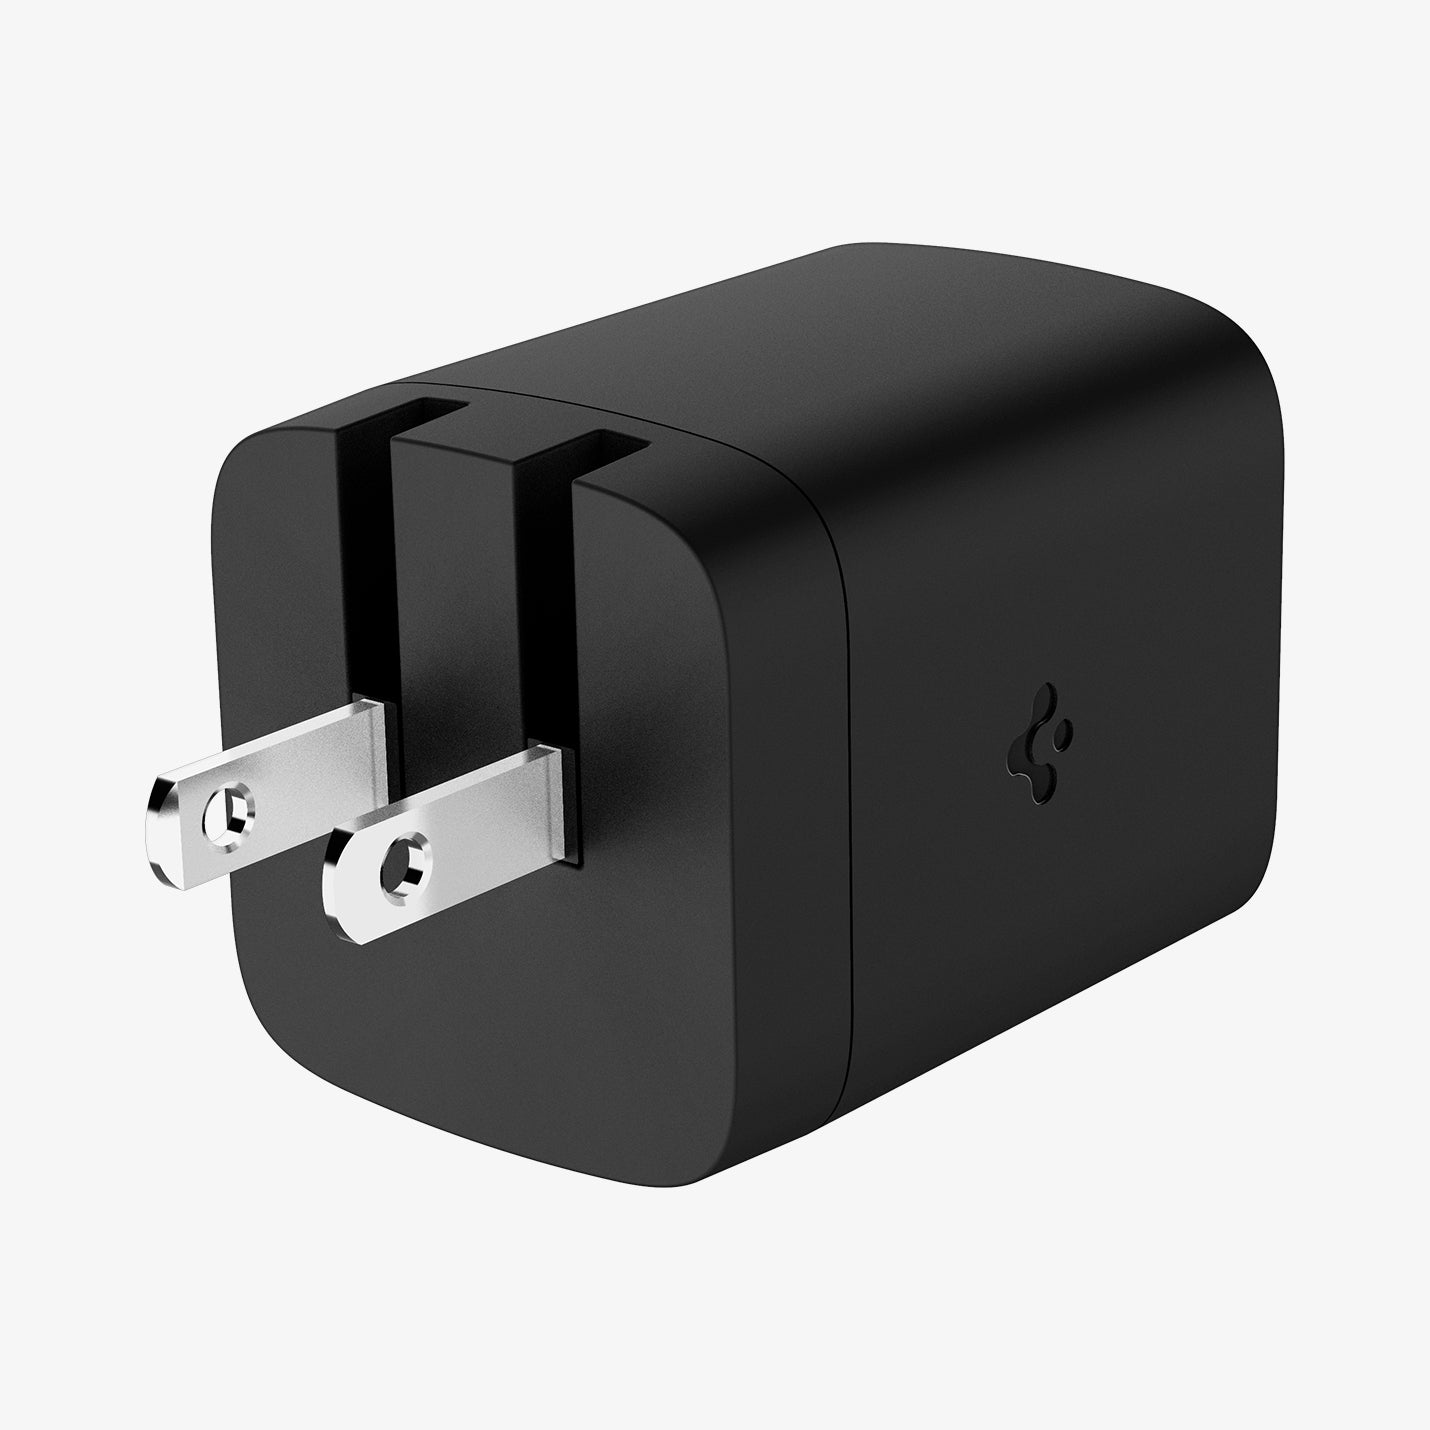 ACH05160 - ArcStation™ Pro GaN 652 Dual USB-C Wall Charger PE2204 in Midnight Black showing both sides and bottom with power connector sticking out from the wall charger